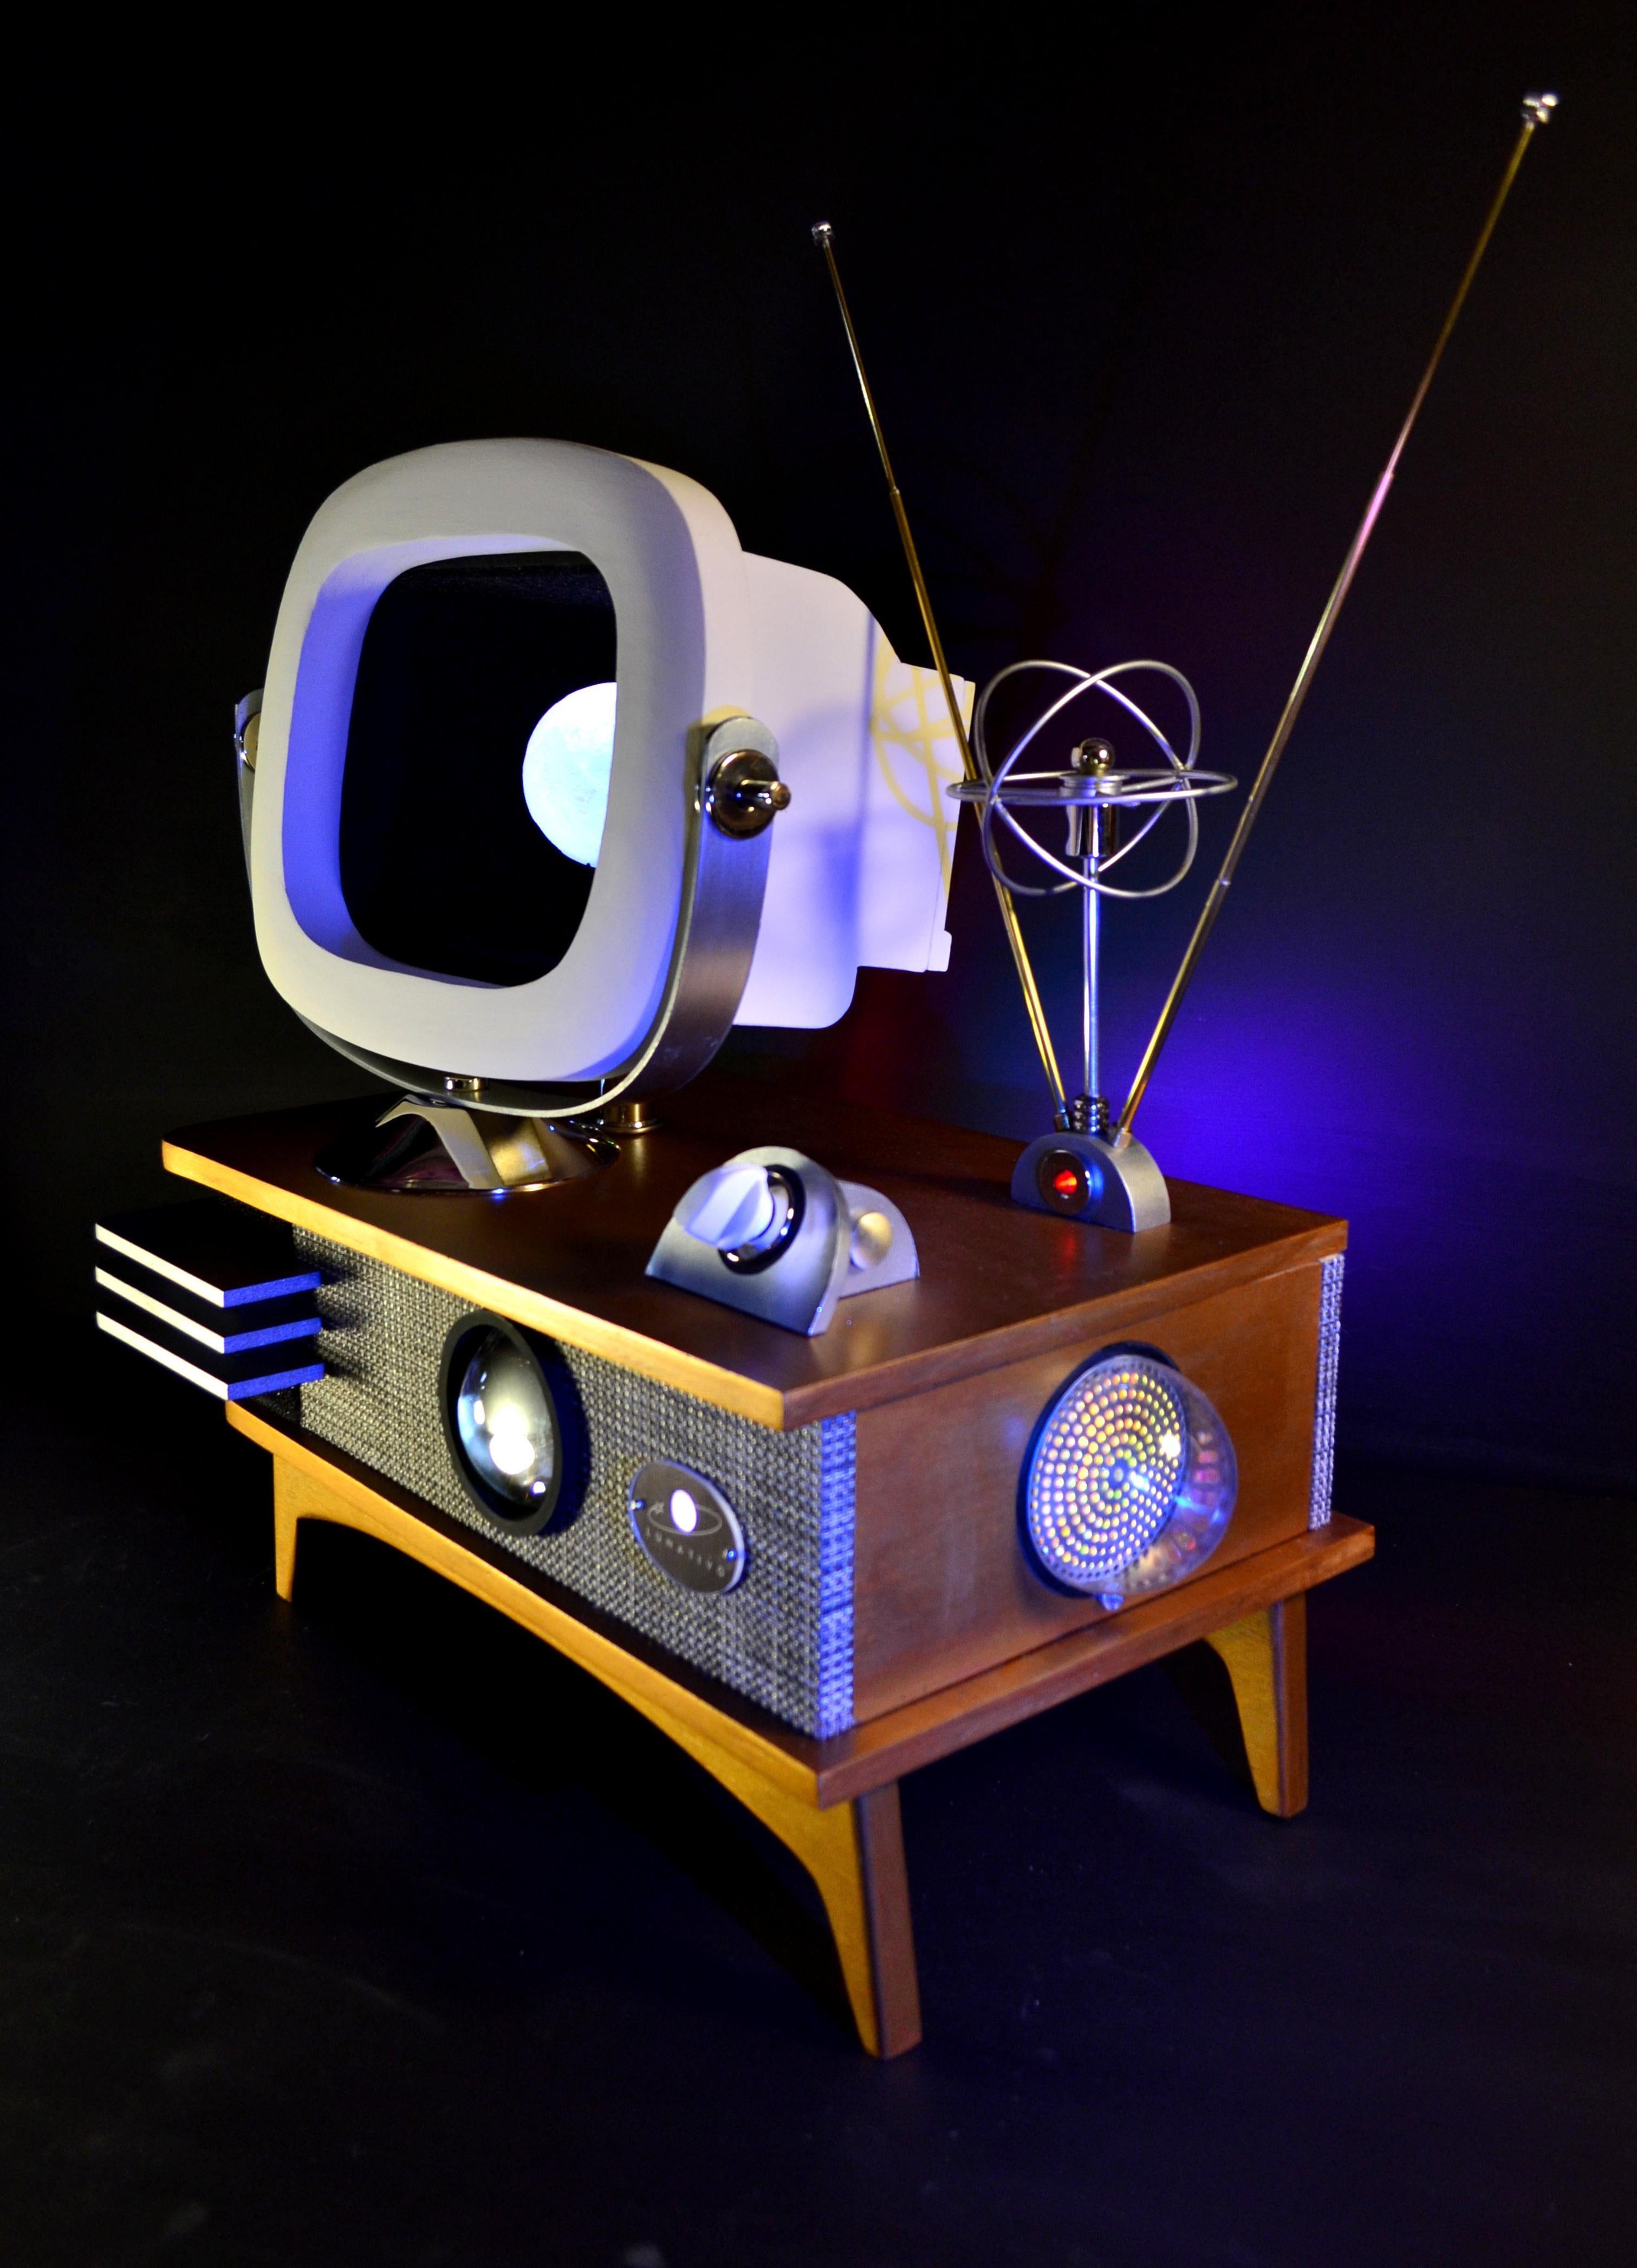 Hand-Crafted Art Donovan / Kinetic, Illuminated, Moon Tv Sculpture, Midcentury/Atomic Age For Sale